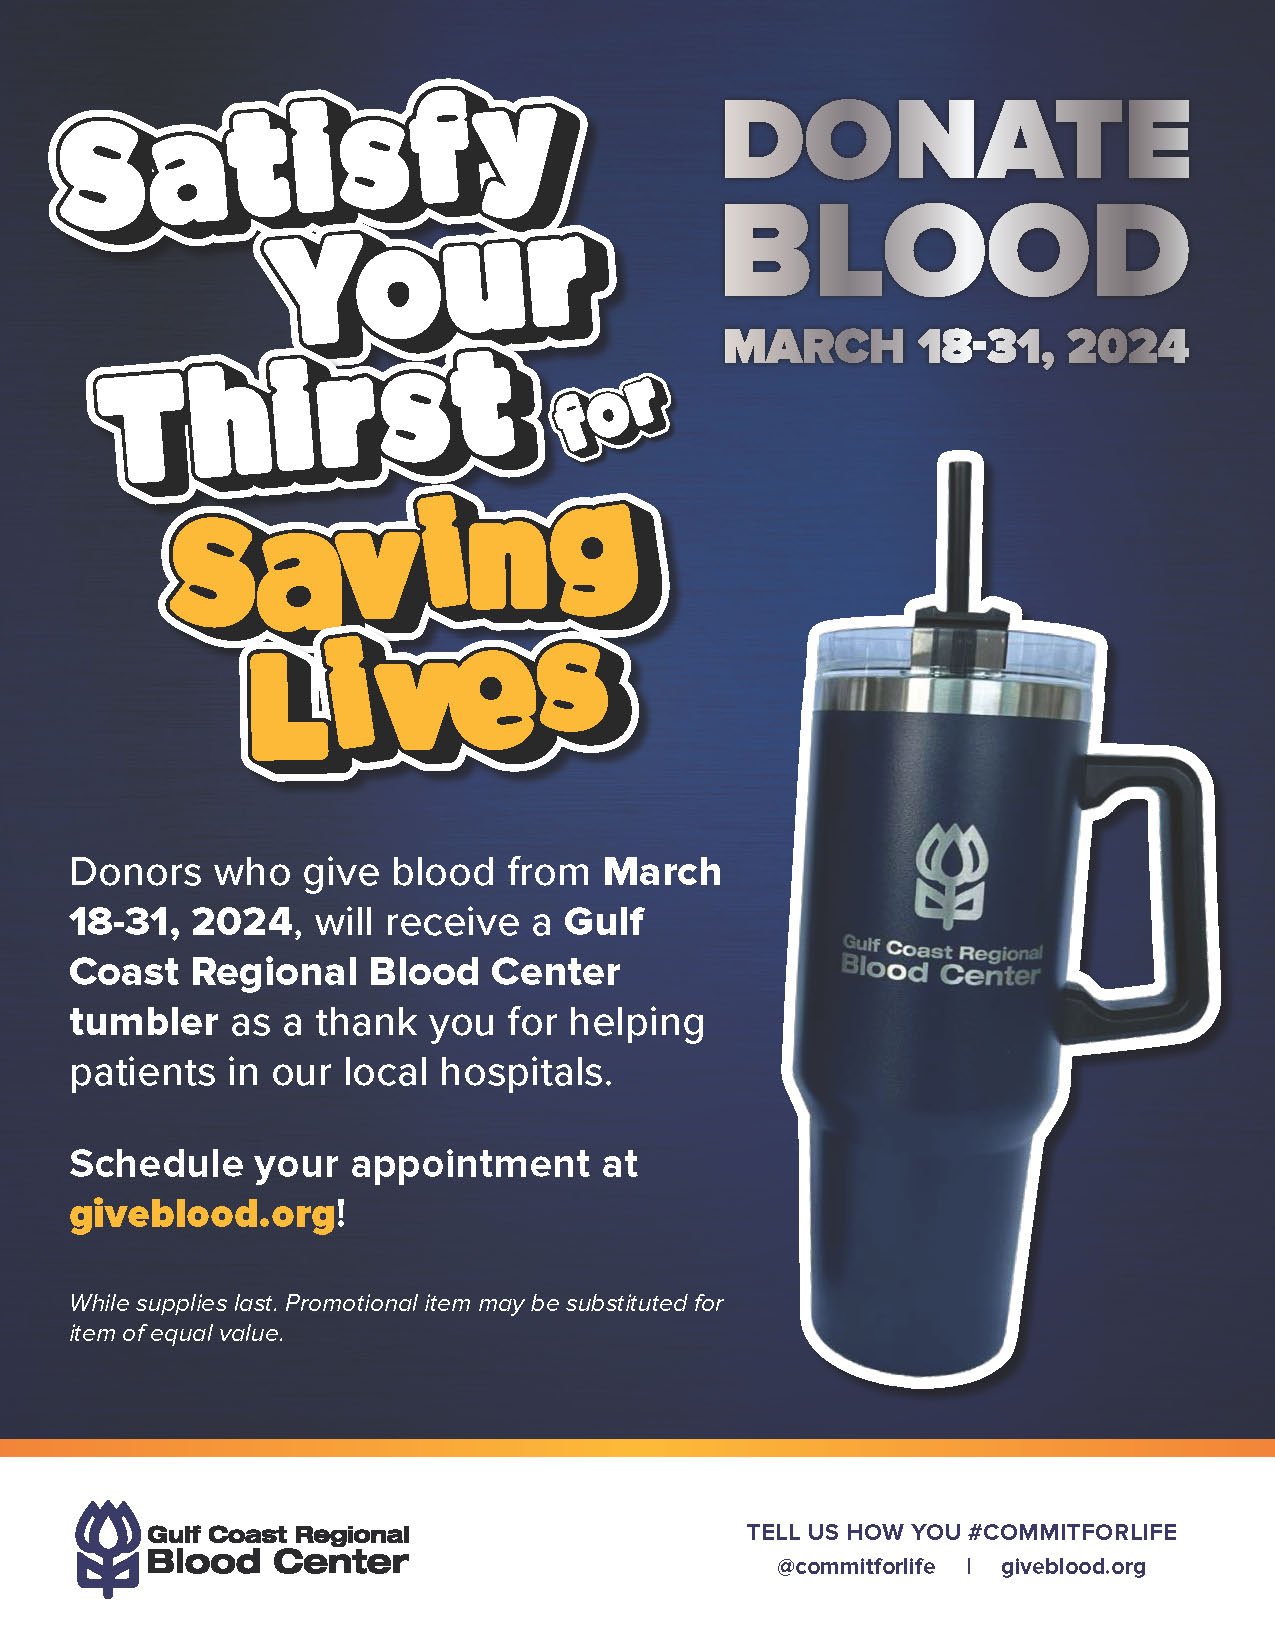 Flyer showing blood donation drive information and a tumbler